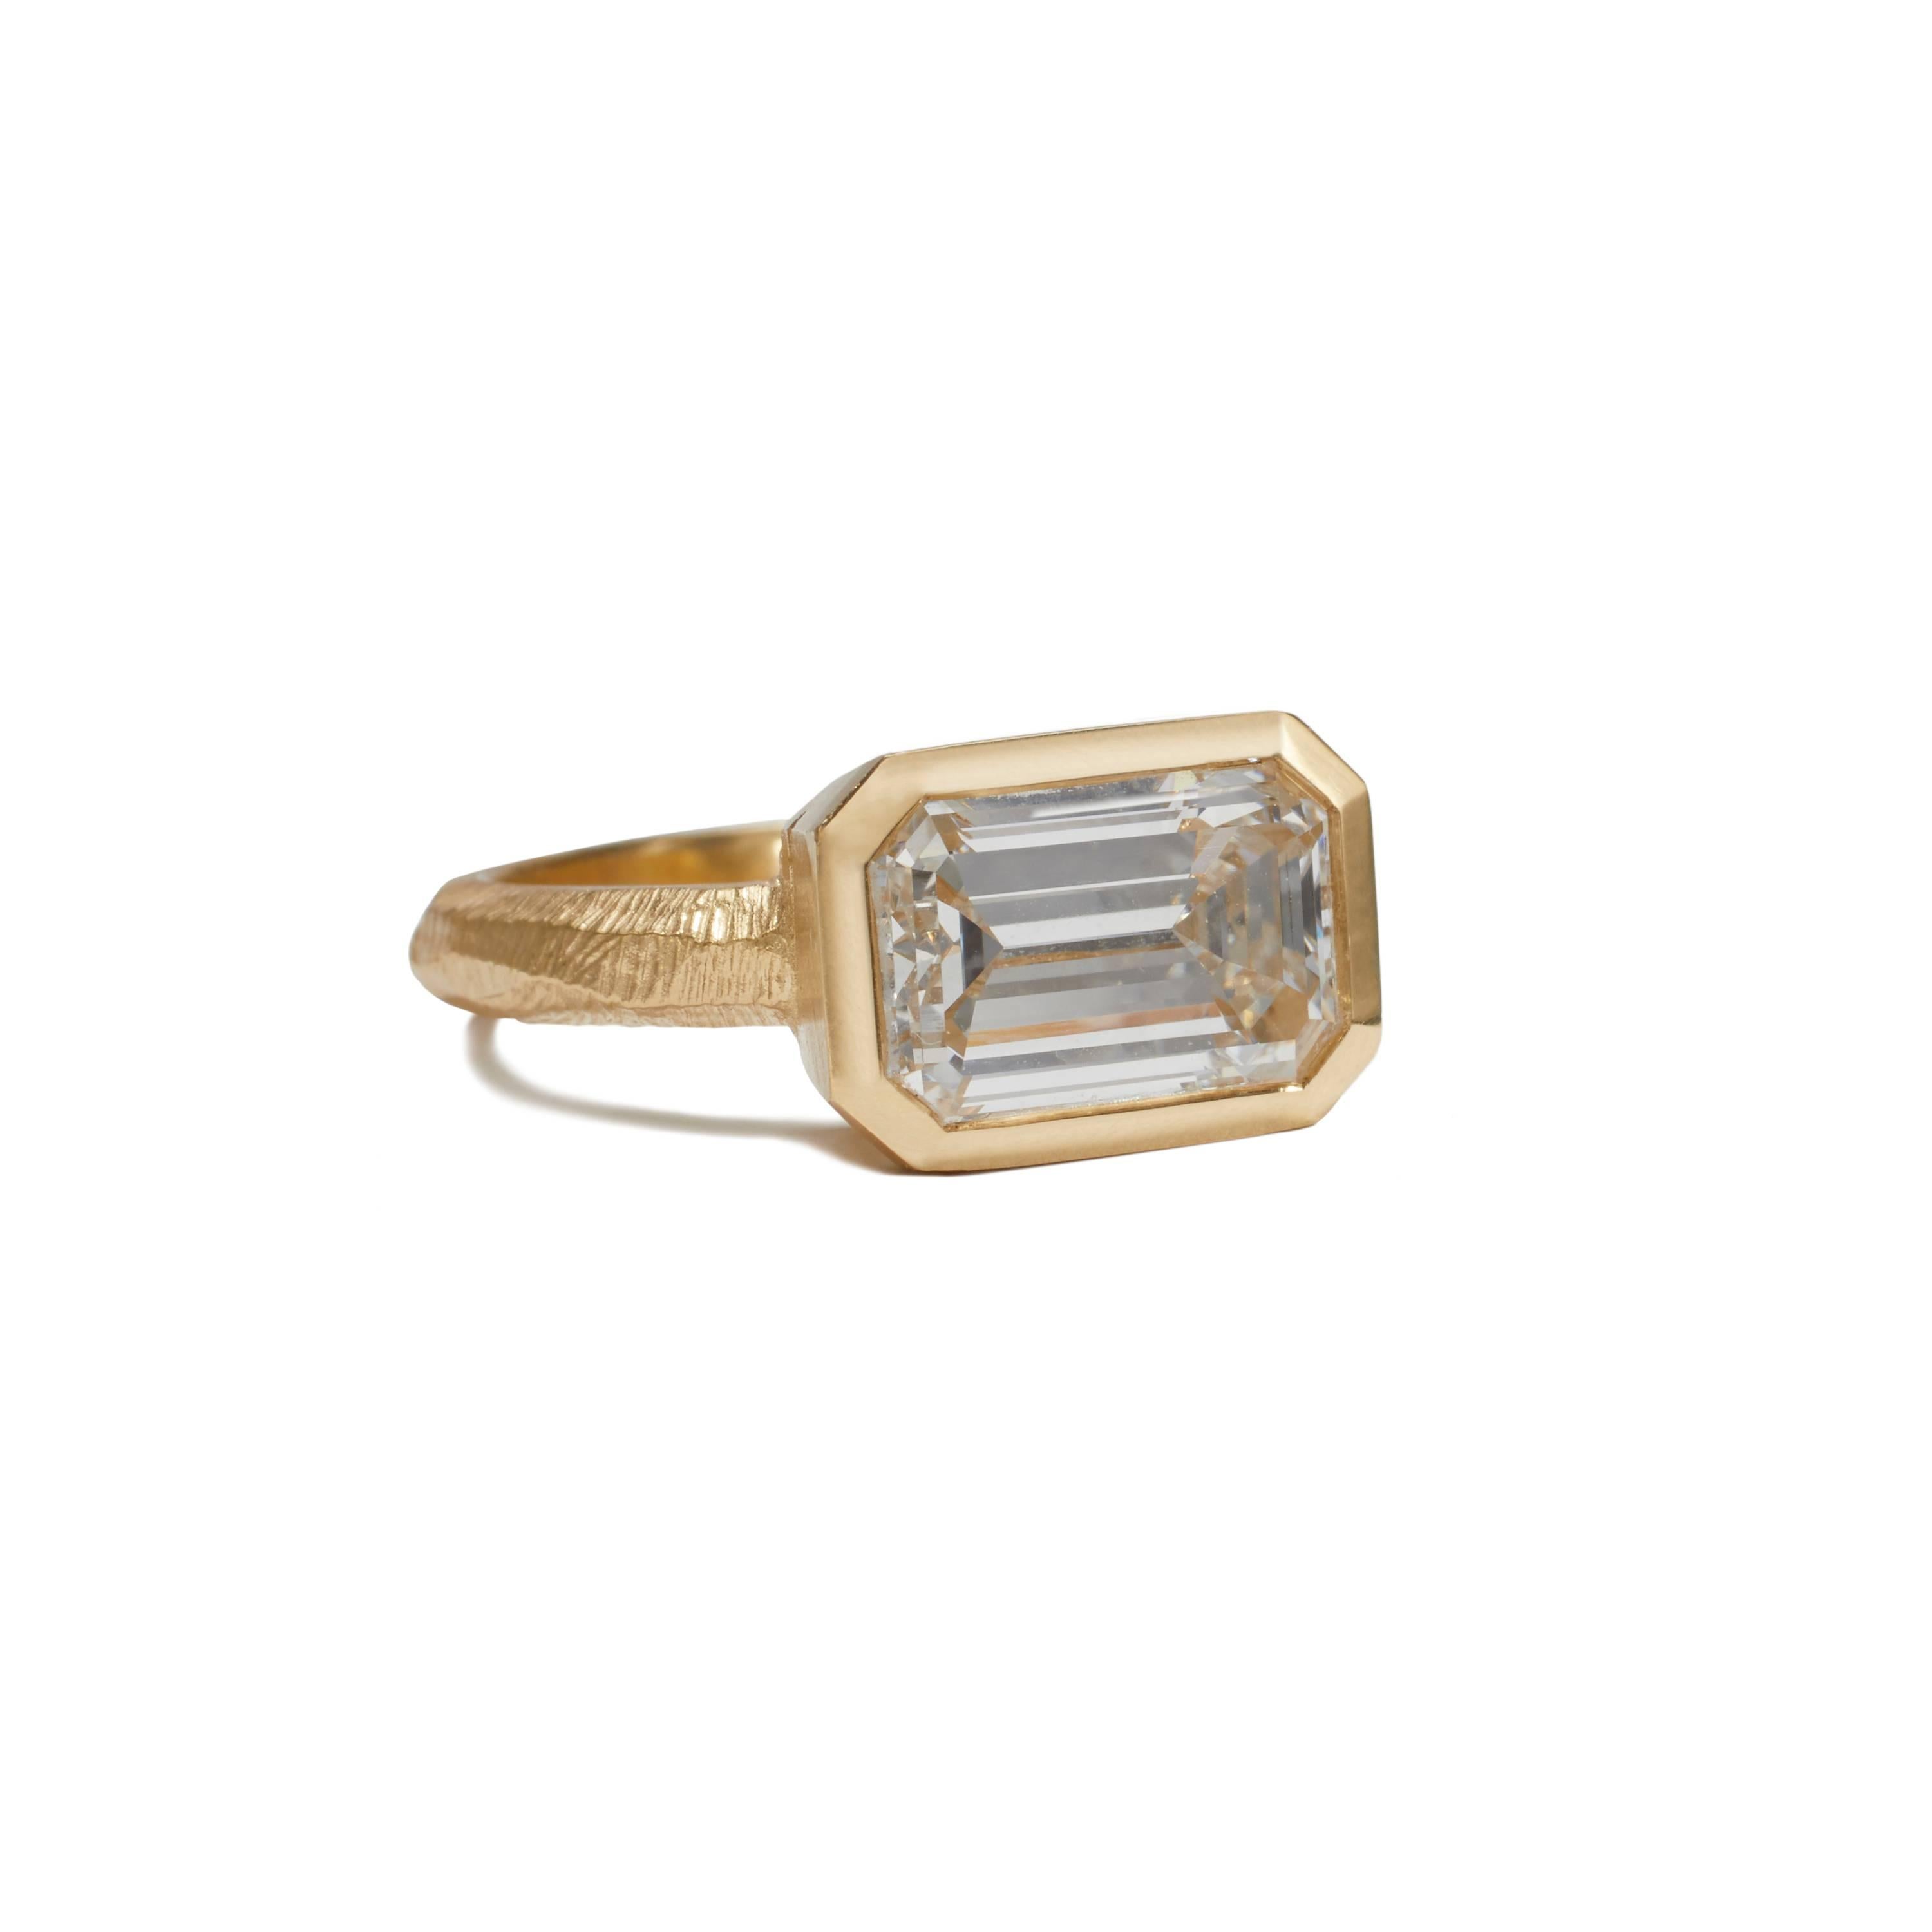 Award winning 18KT gold engagement ring with GIA Certified 3.32 Carat emerald cut diamond designed and made by Page Sargisson with recycled gold.  

The ring won 3rd place in the 2018 InStore Magazine's Design awards in the Engagement Ring